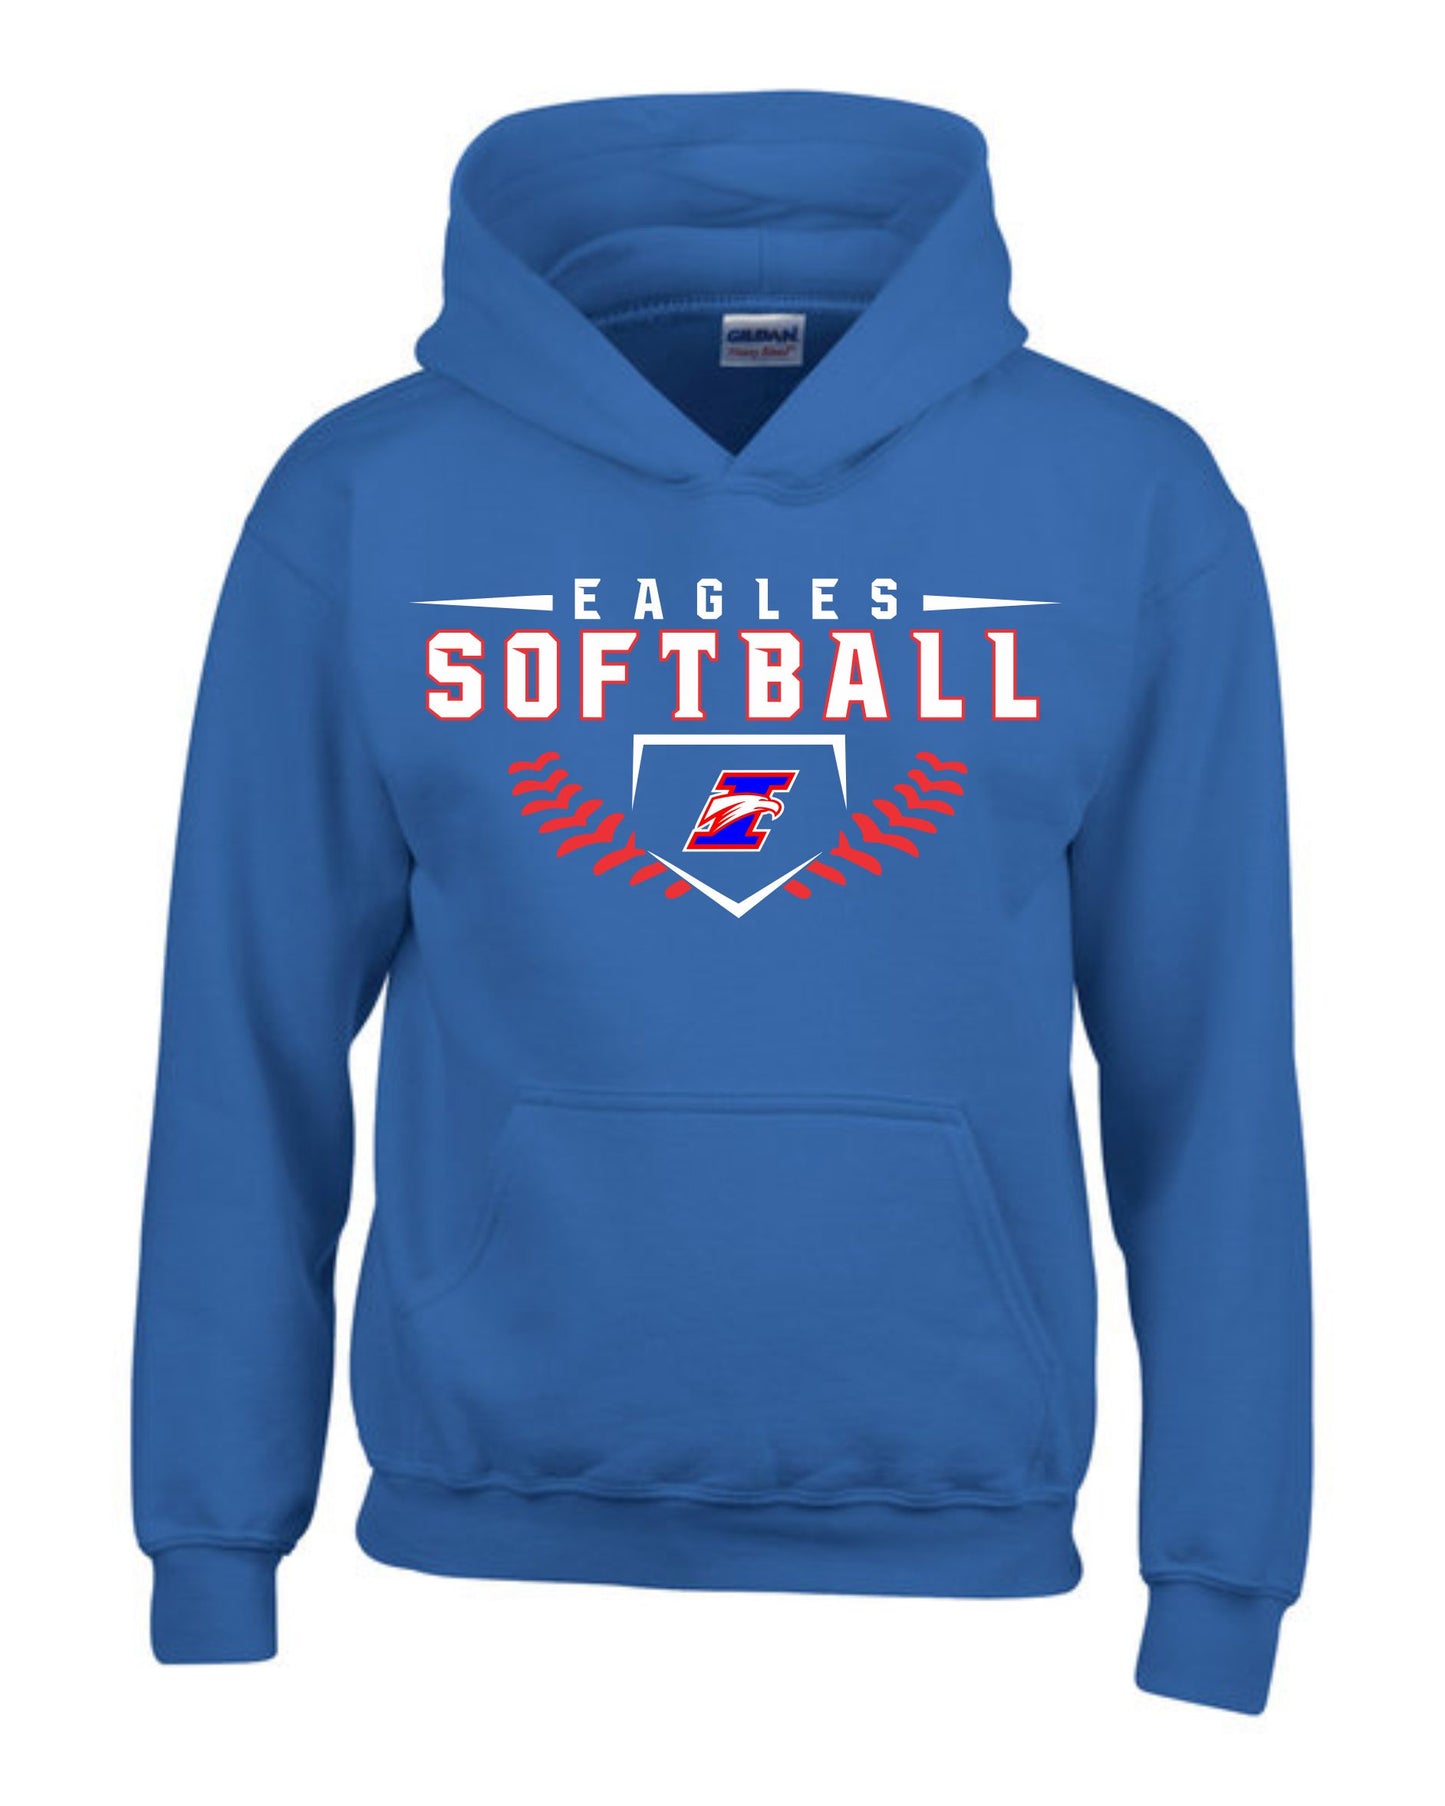 Immanuel Softball Lace Hoodie - Youth